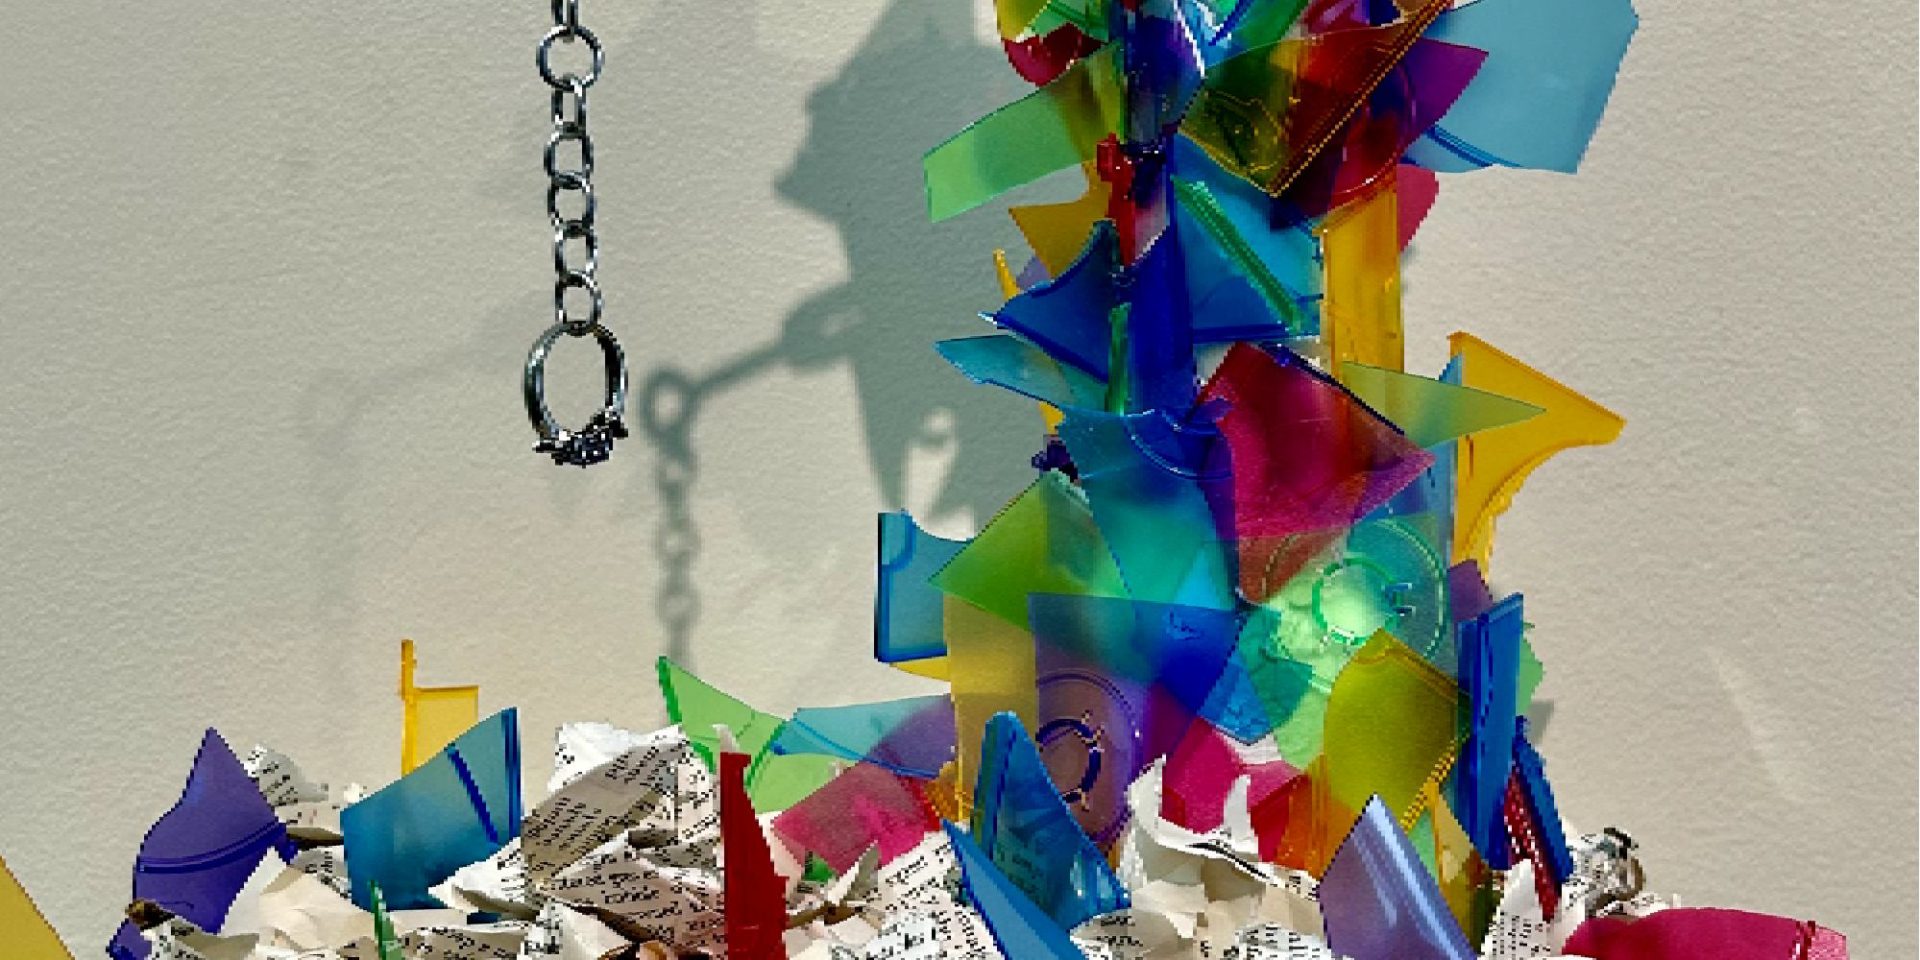 Image of broken bits of colorful plastic pieces in a tower form. Crumpled and ripped book pages are at the bottom and a chain holding a ring dangles on the left, hanging from the plastic tower.